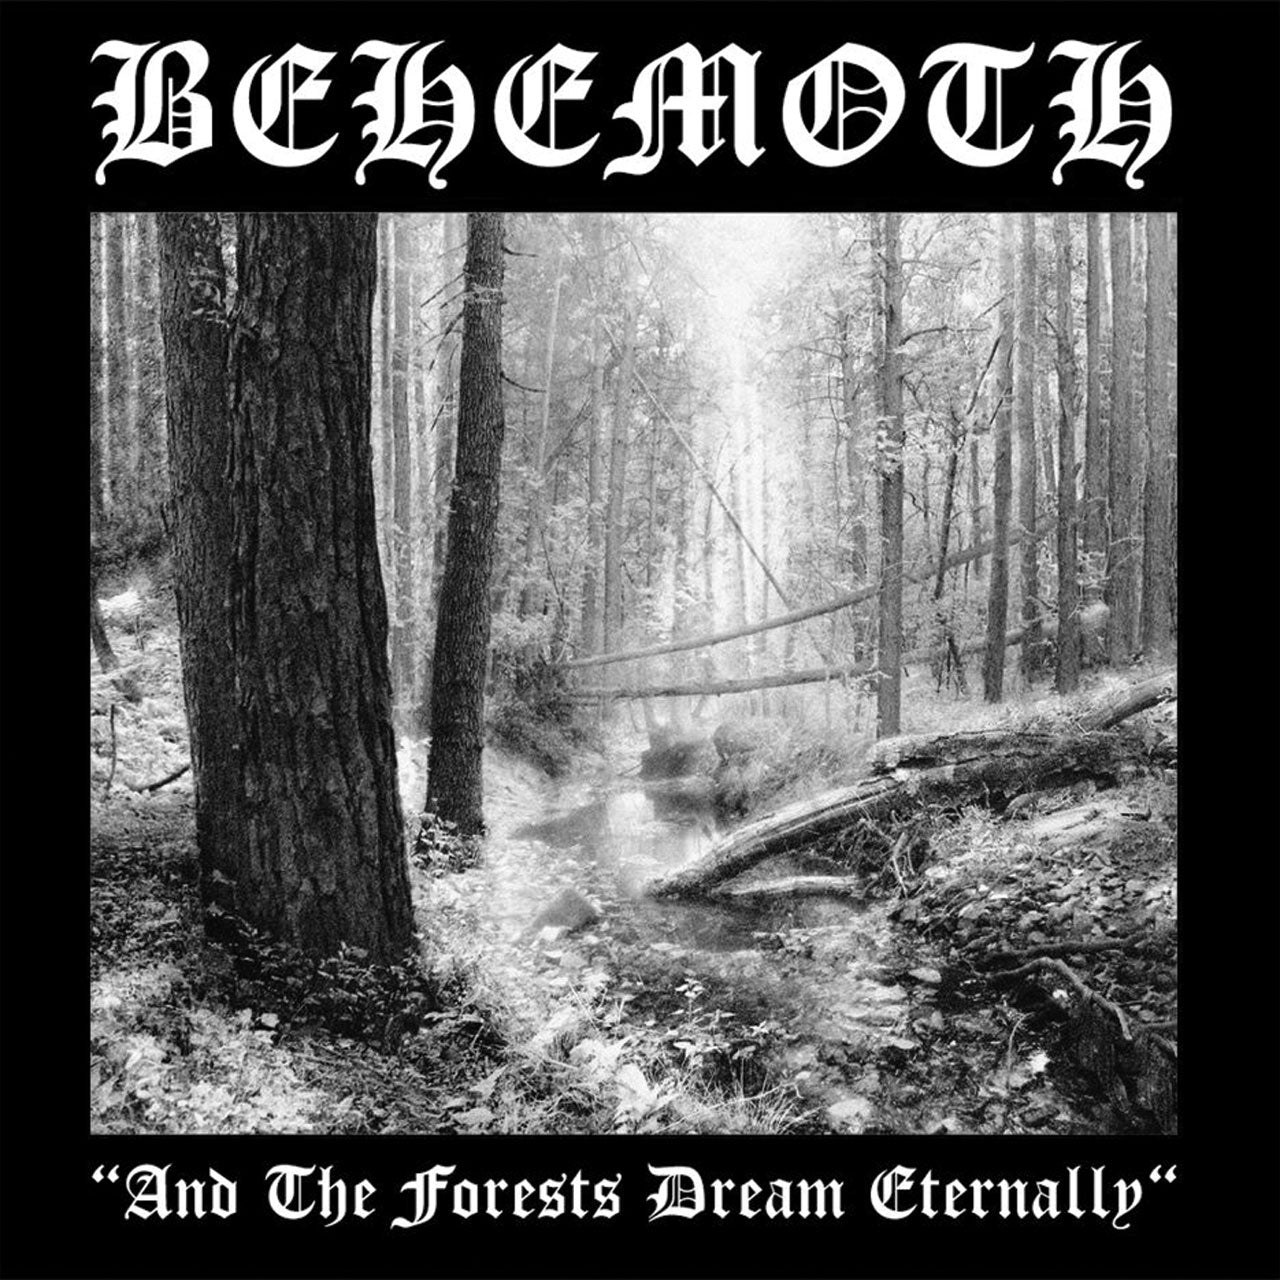 Behemoth - And the Forests Dream Eternally (2018 Reissue) (Clear Edition) (LP)